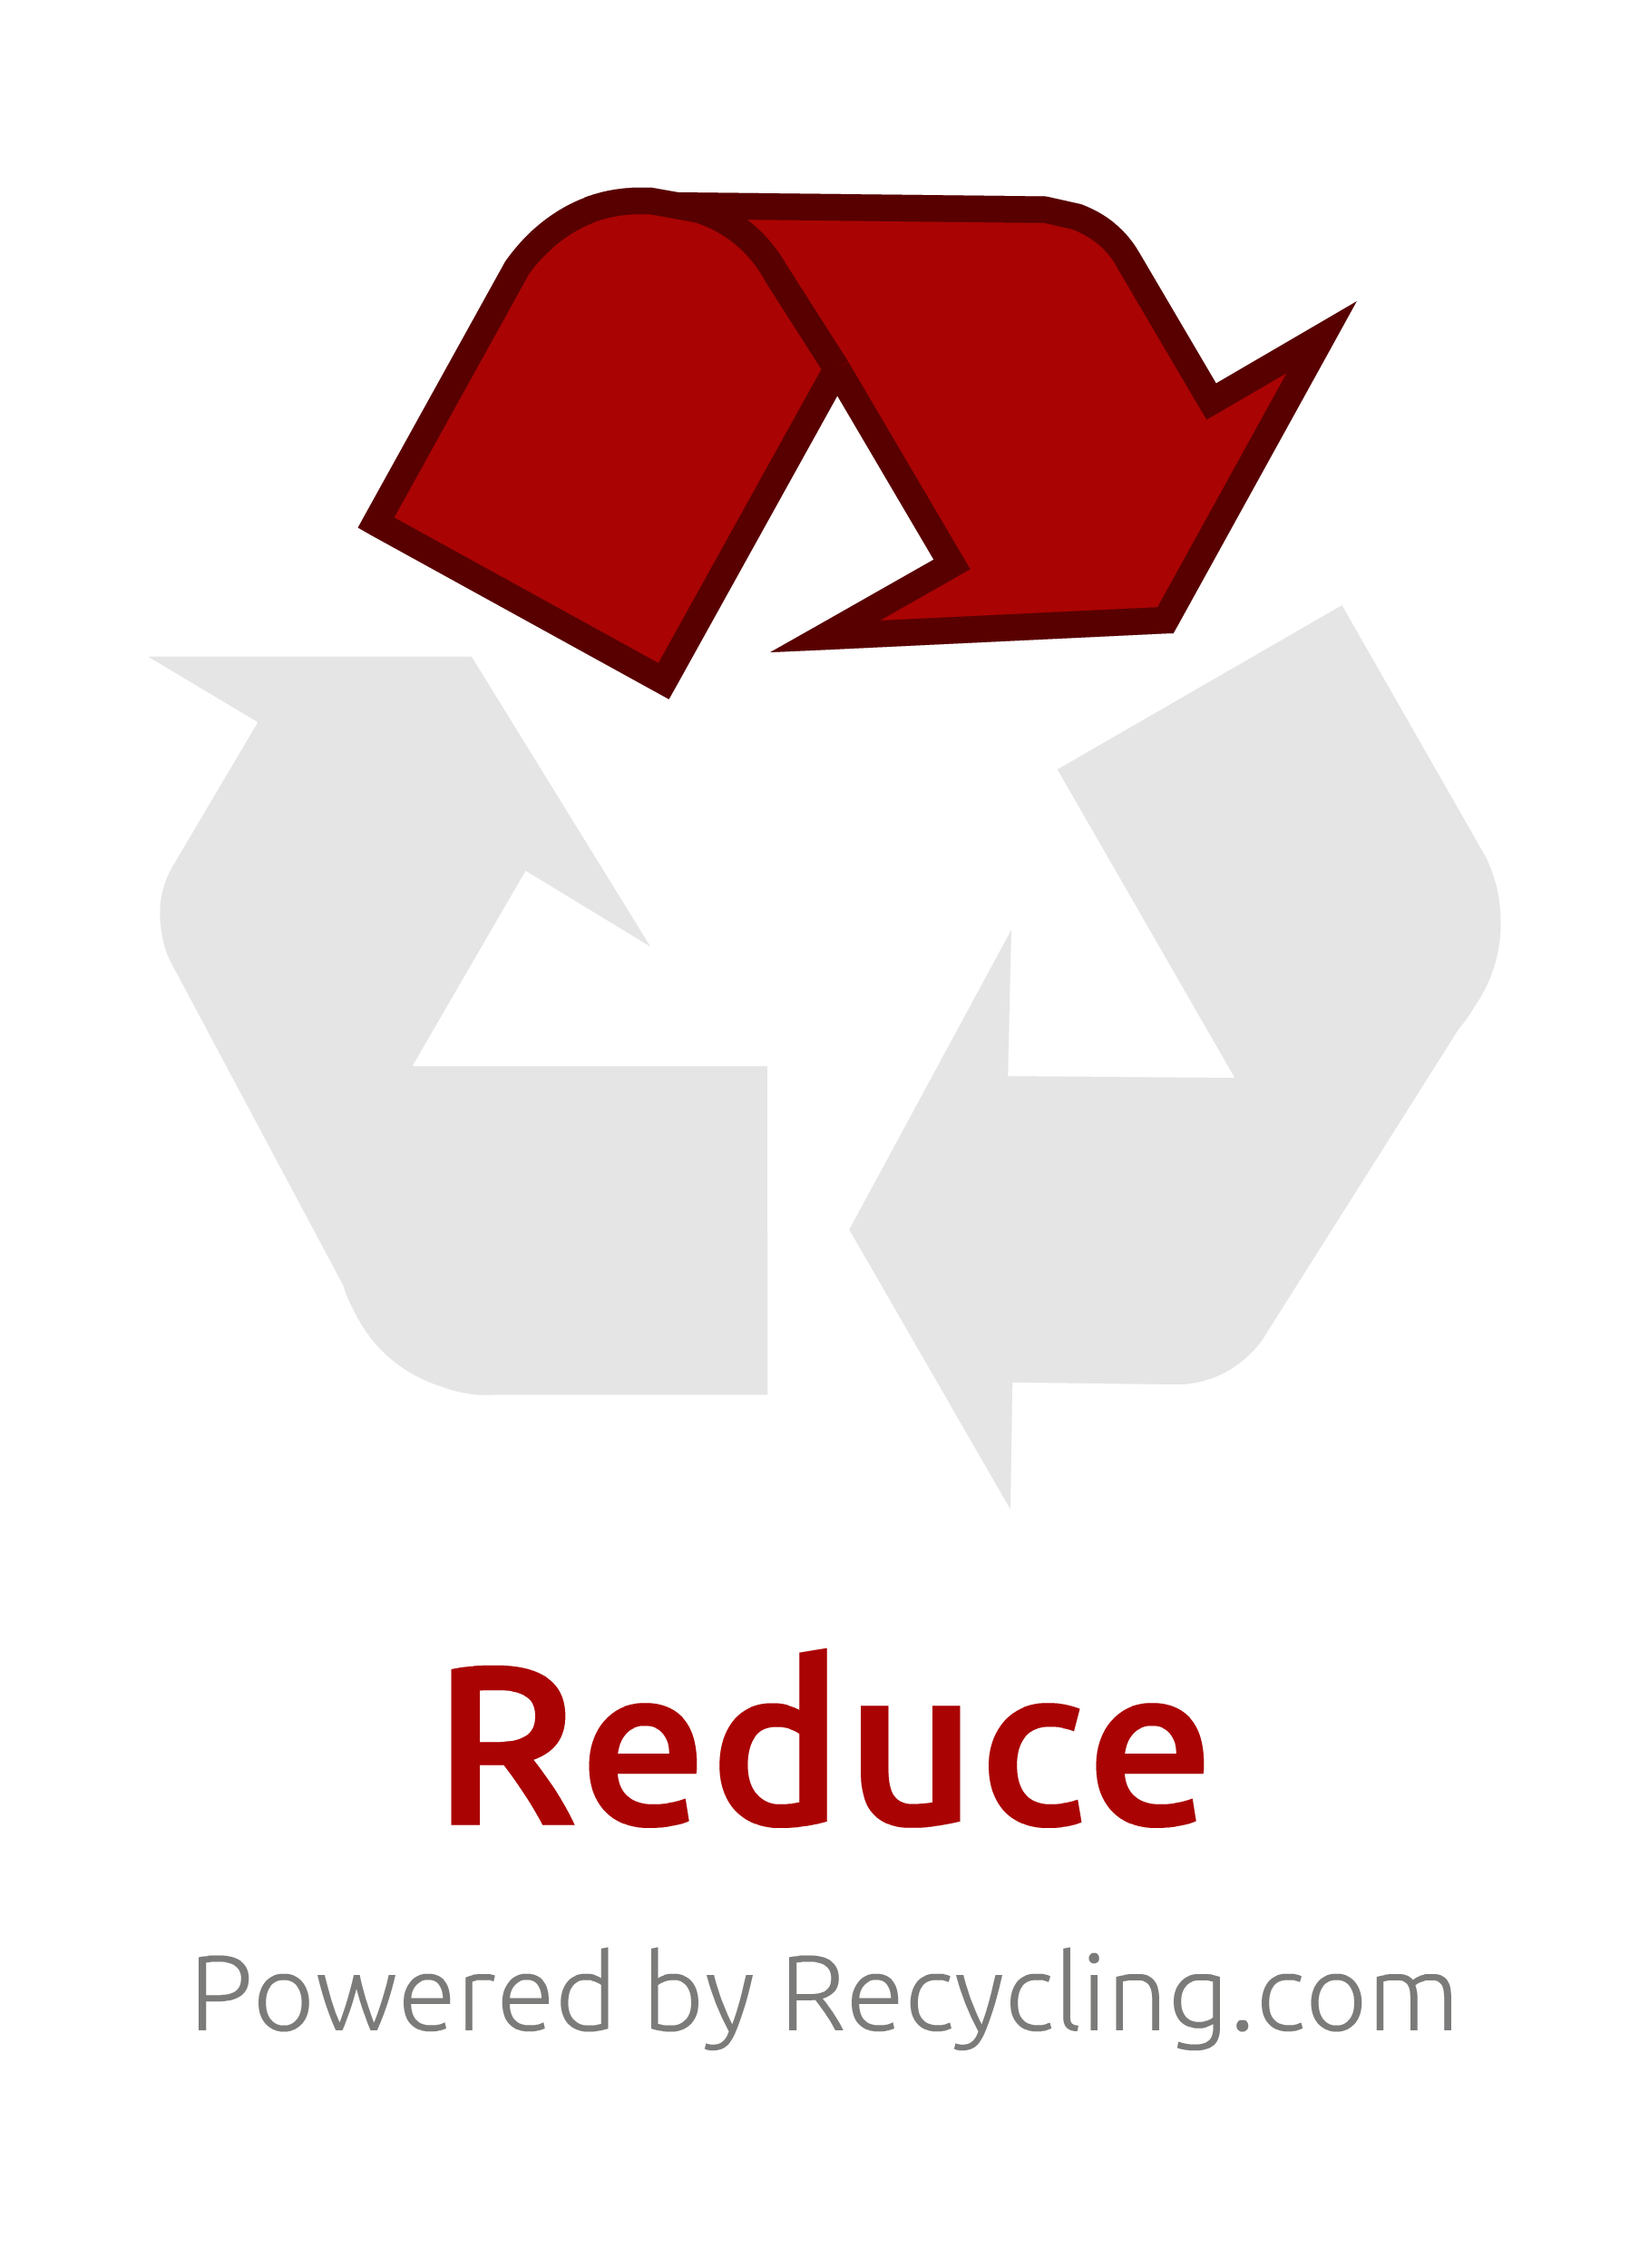 Trilogy Logo - The Recycling Trilogy - Reduce, Reuse, Recycle | Download